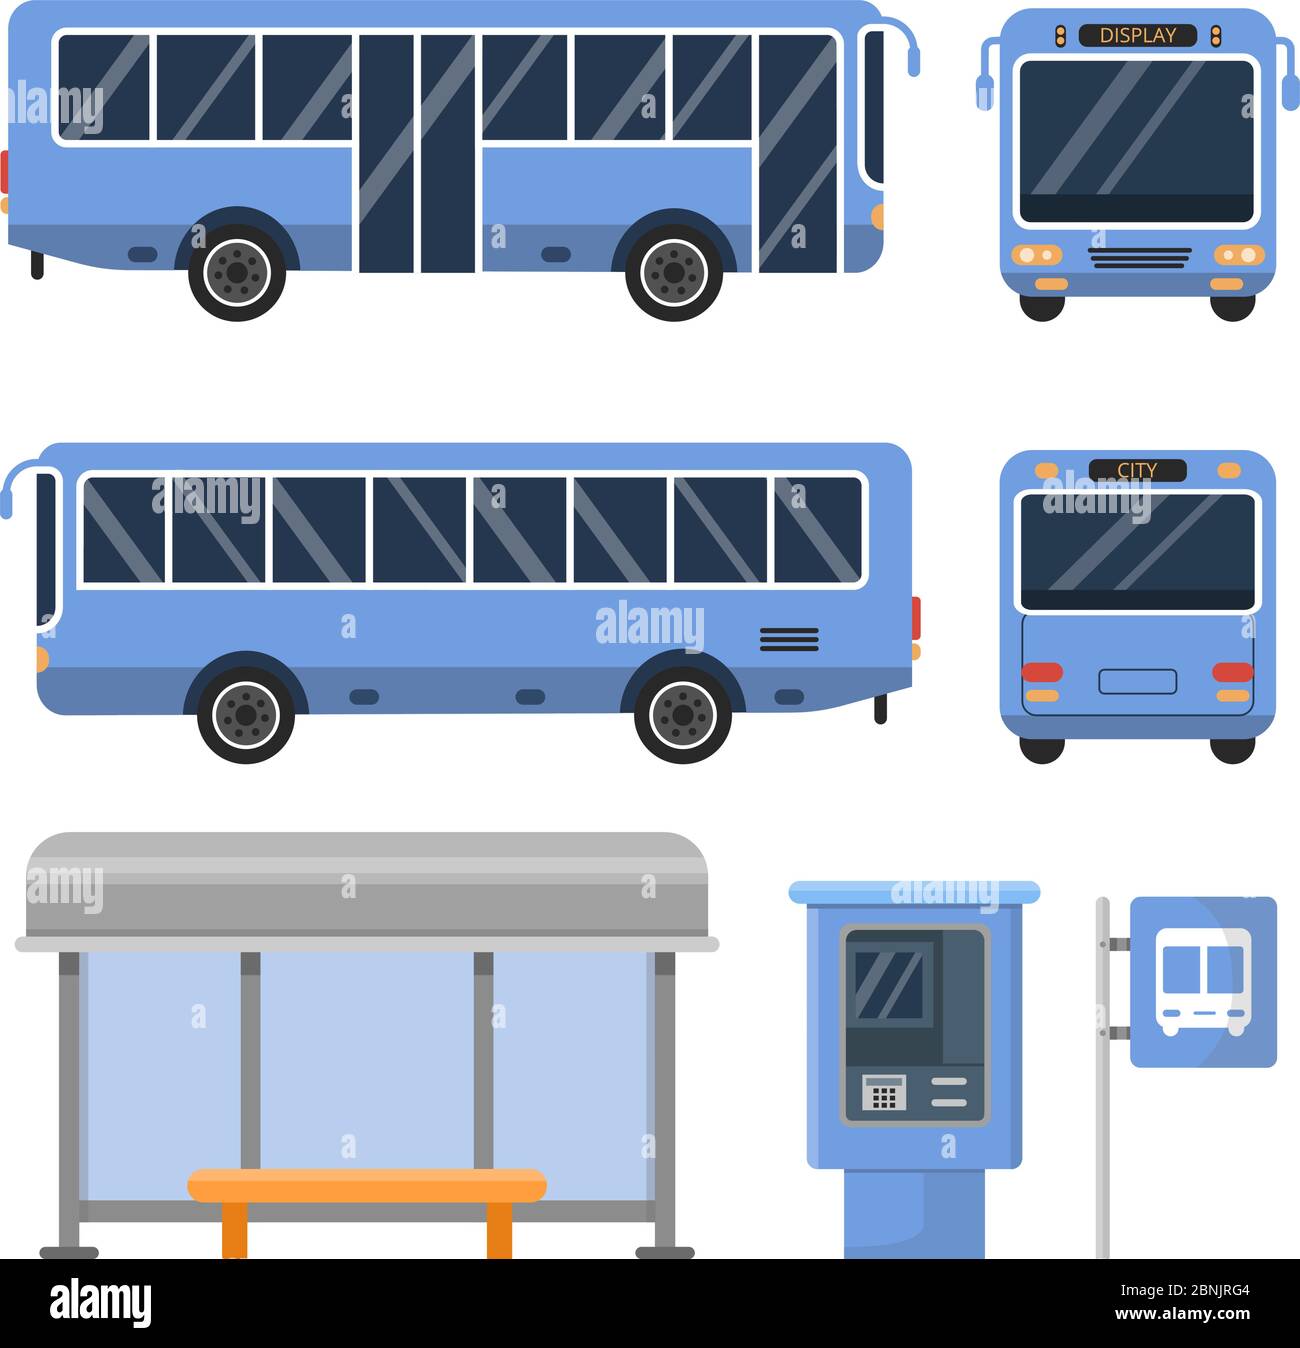 Illustration of bus stop. And various views of buses Stock Vector